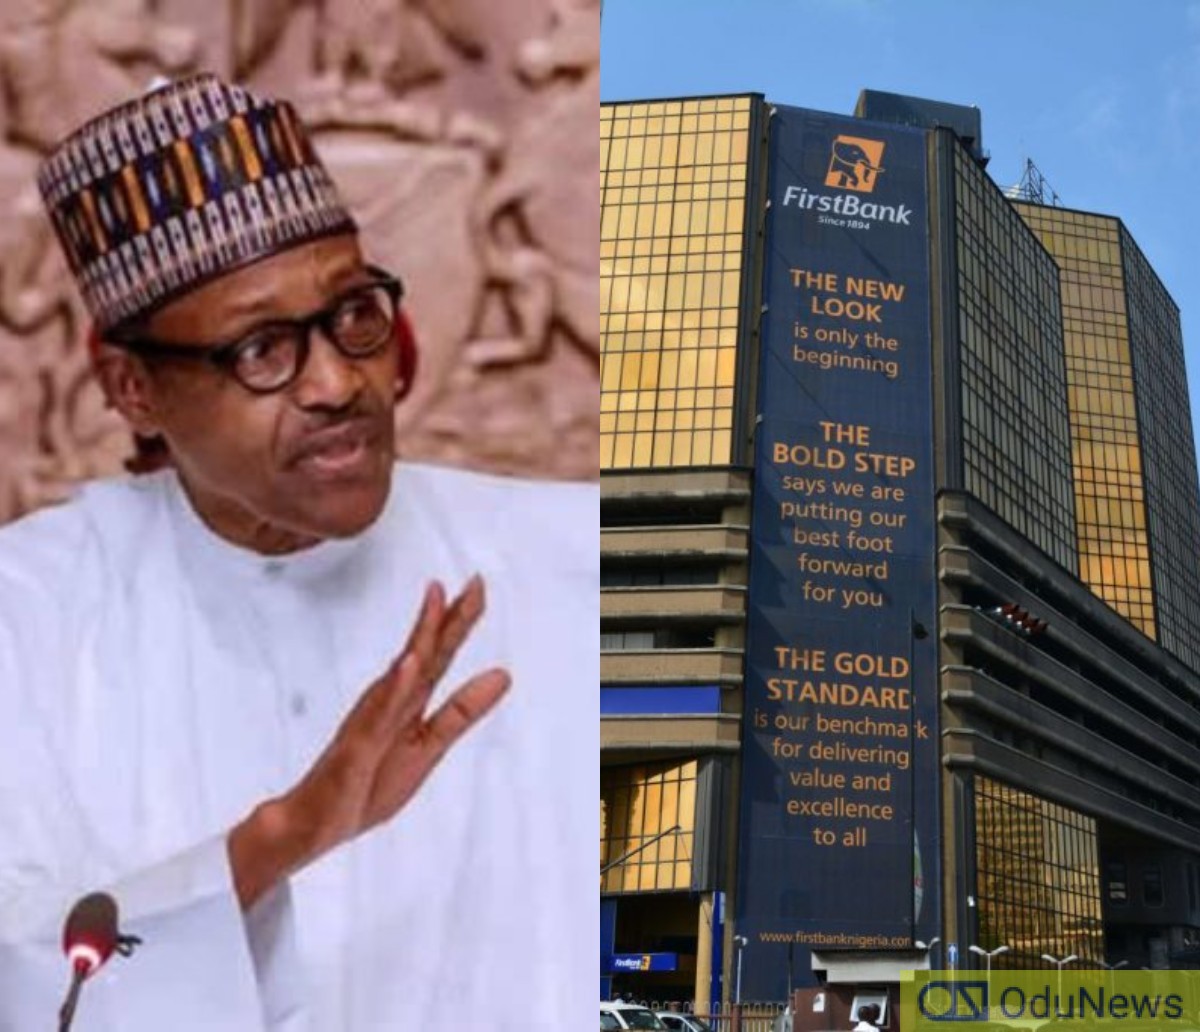 Buhari Congratulates First Bank On 40 Years Of Cross-Border Banking In UK